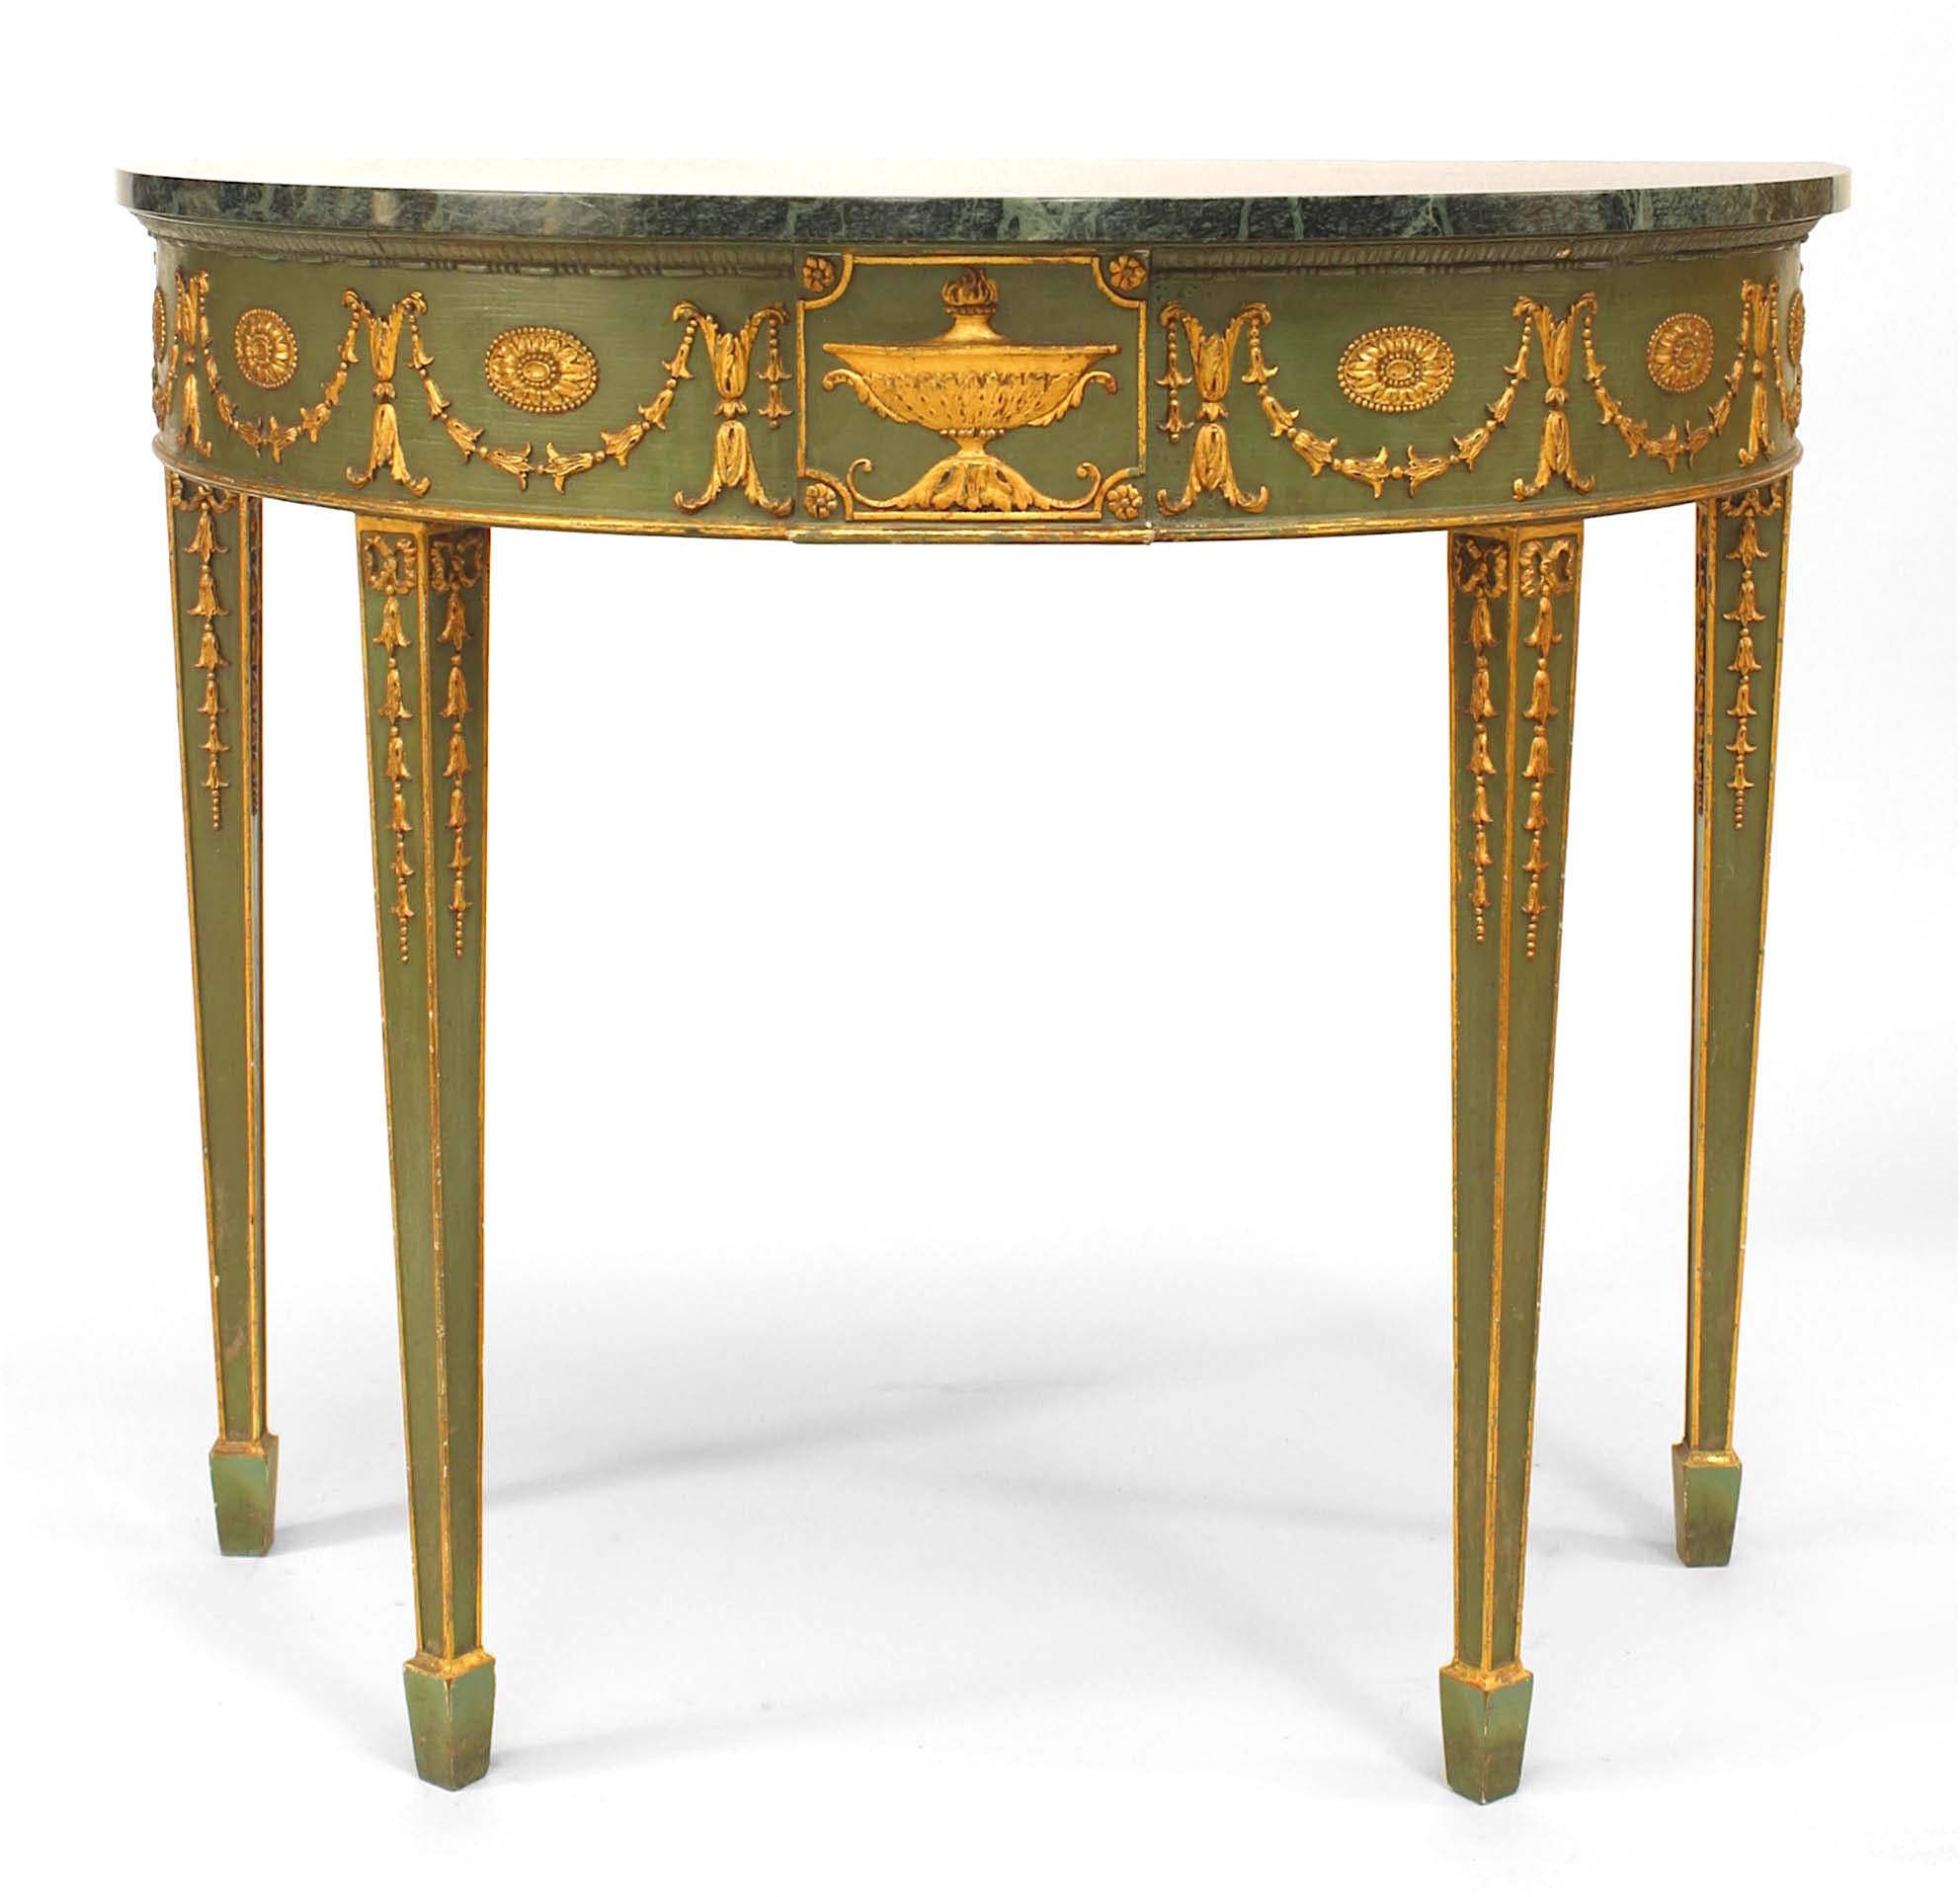 English Adam-style (19th Century) green painted half round console table with gilt applied swag and medallion trim to apron and legs with a green marble top.
